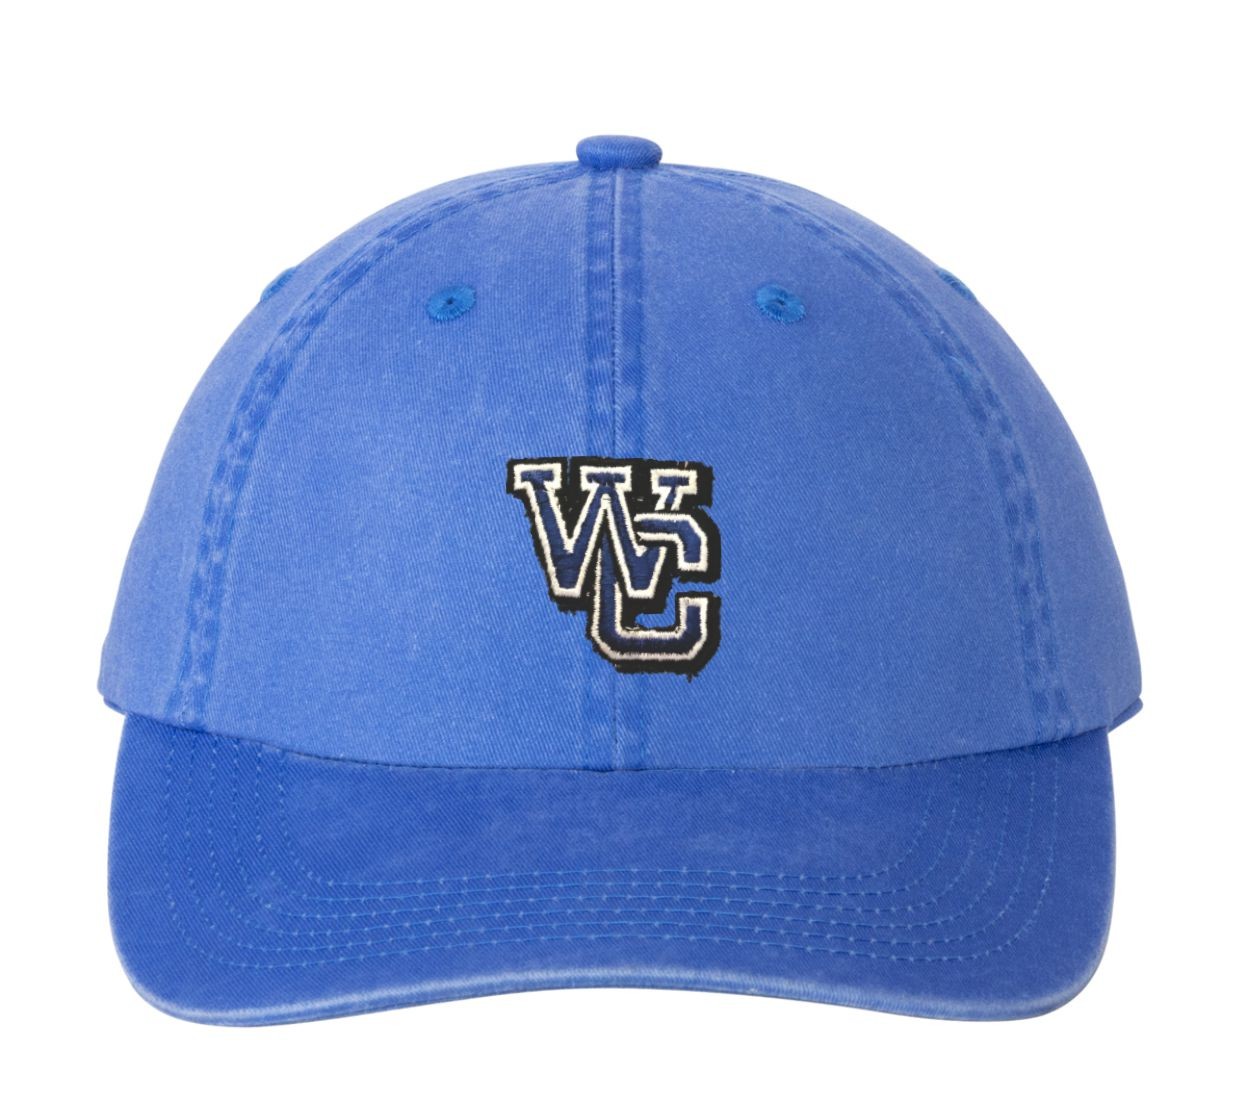 West Central Garment Washed Cap - Faded Blue